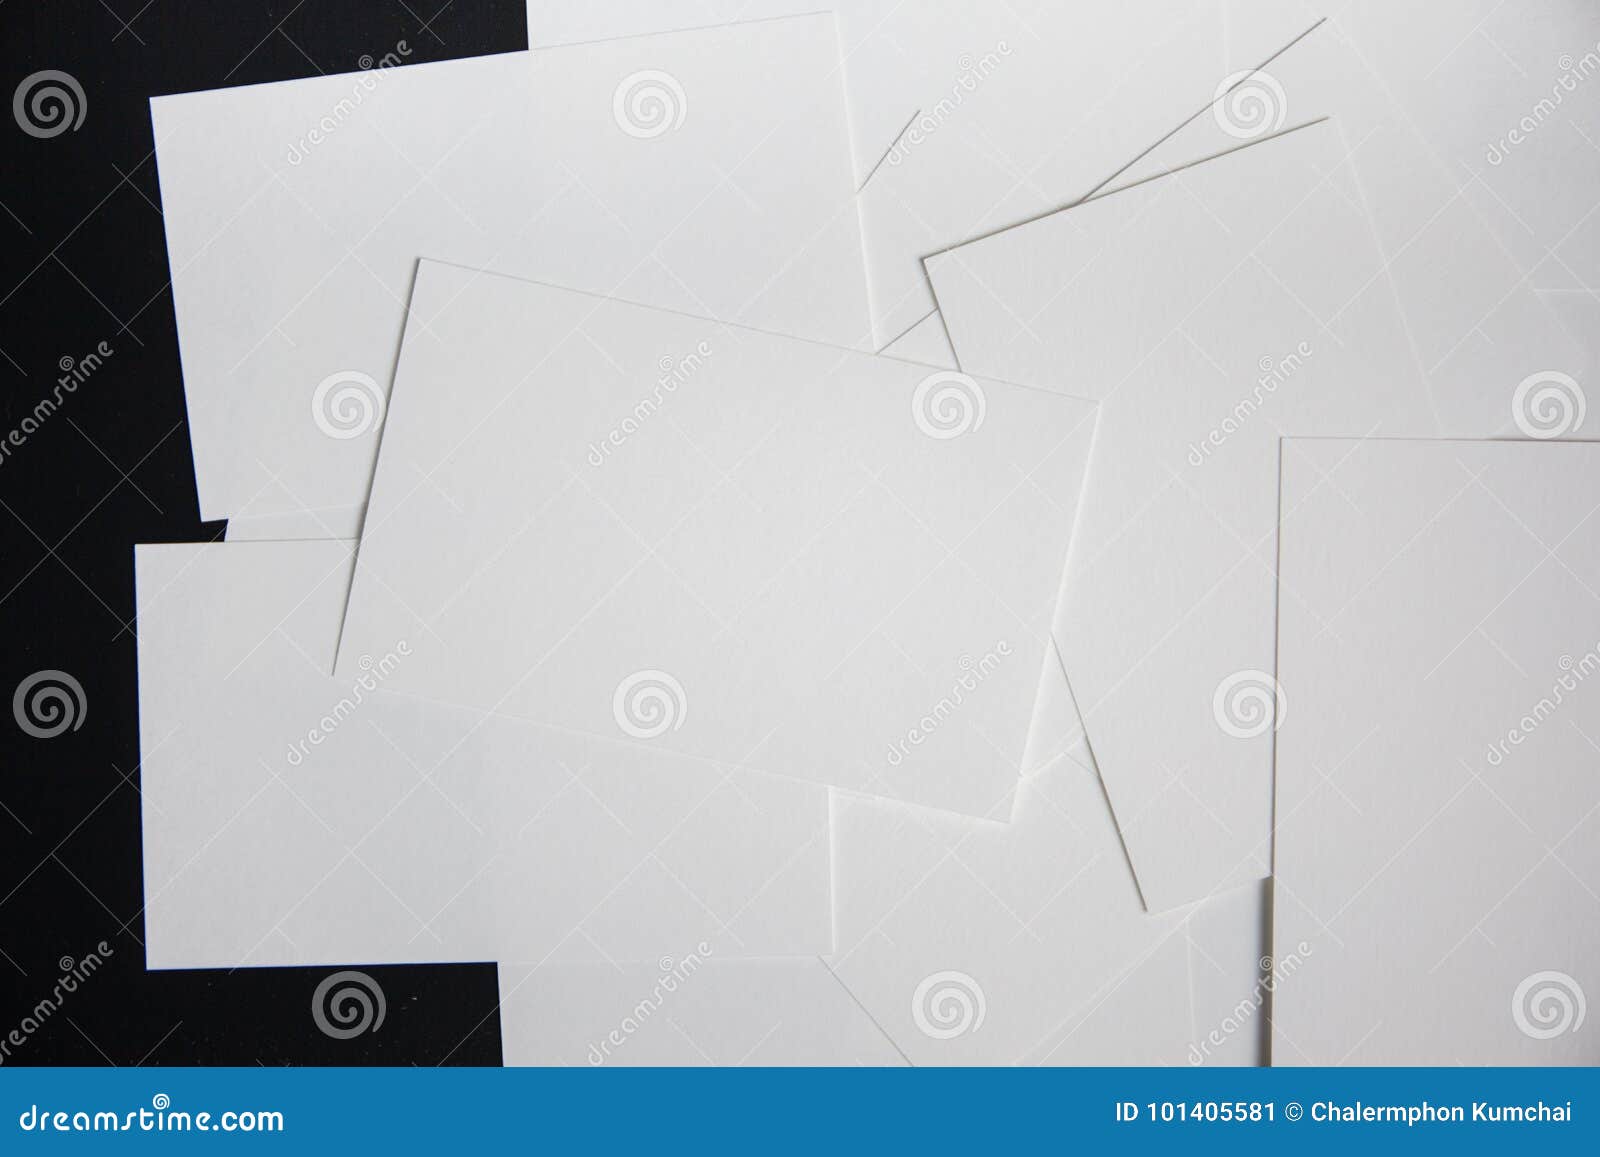 Download Mockup Of Business Cards Fan Stack At Black Textured Paper Background. Stock Image - Image of ...